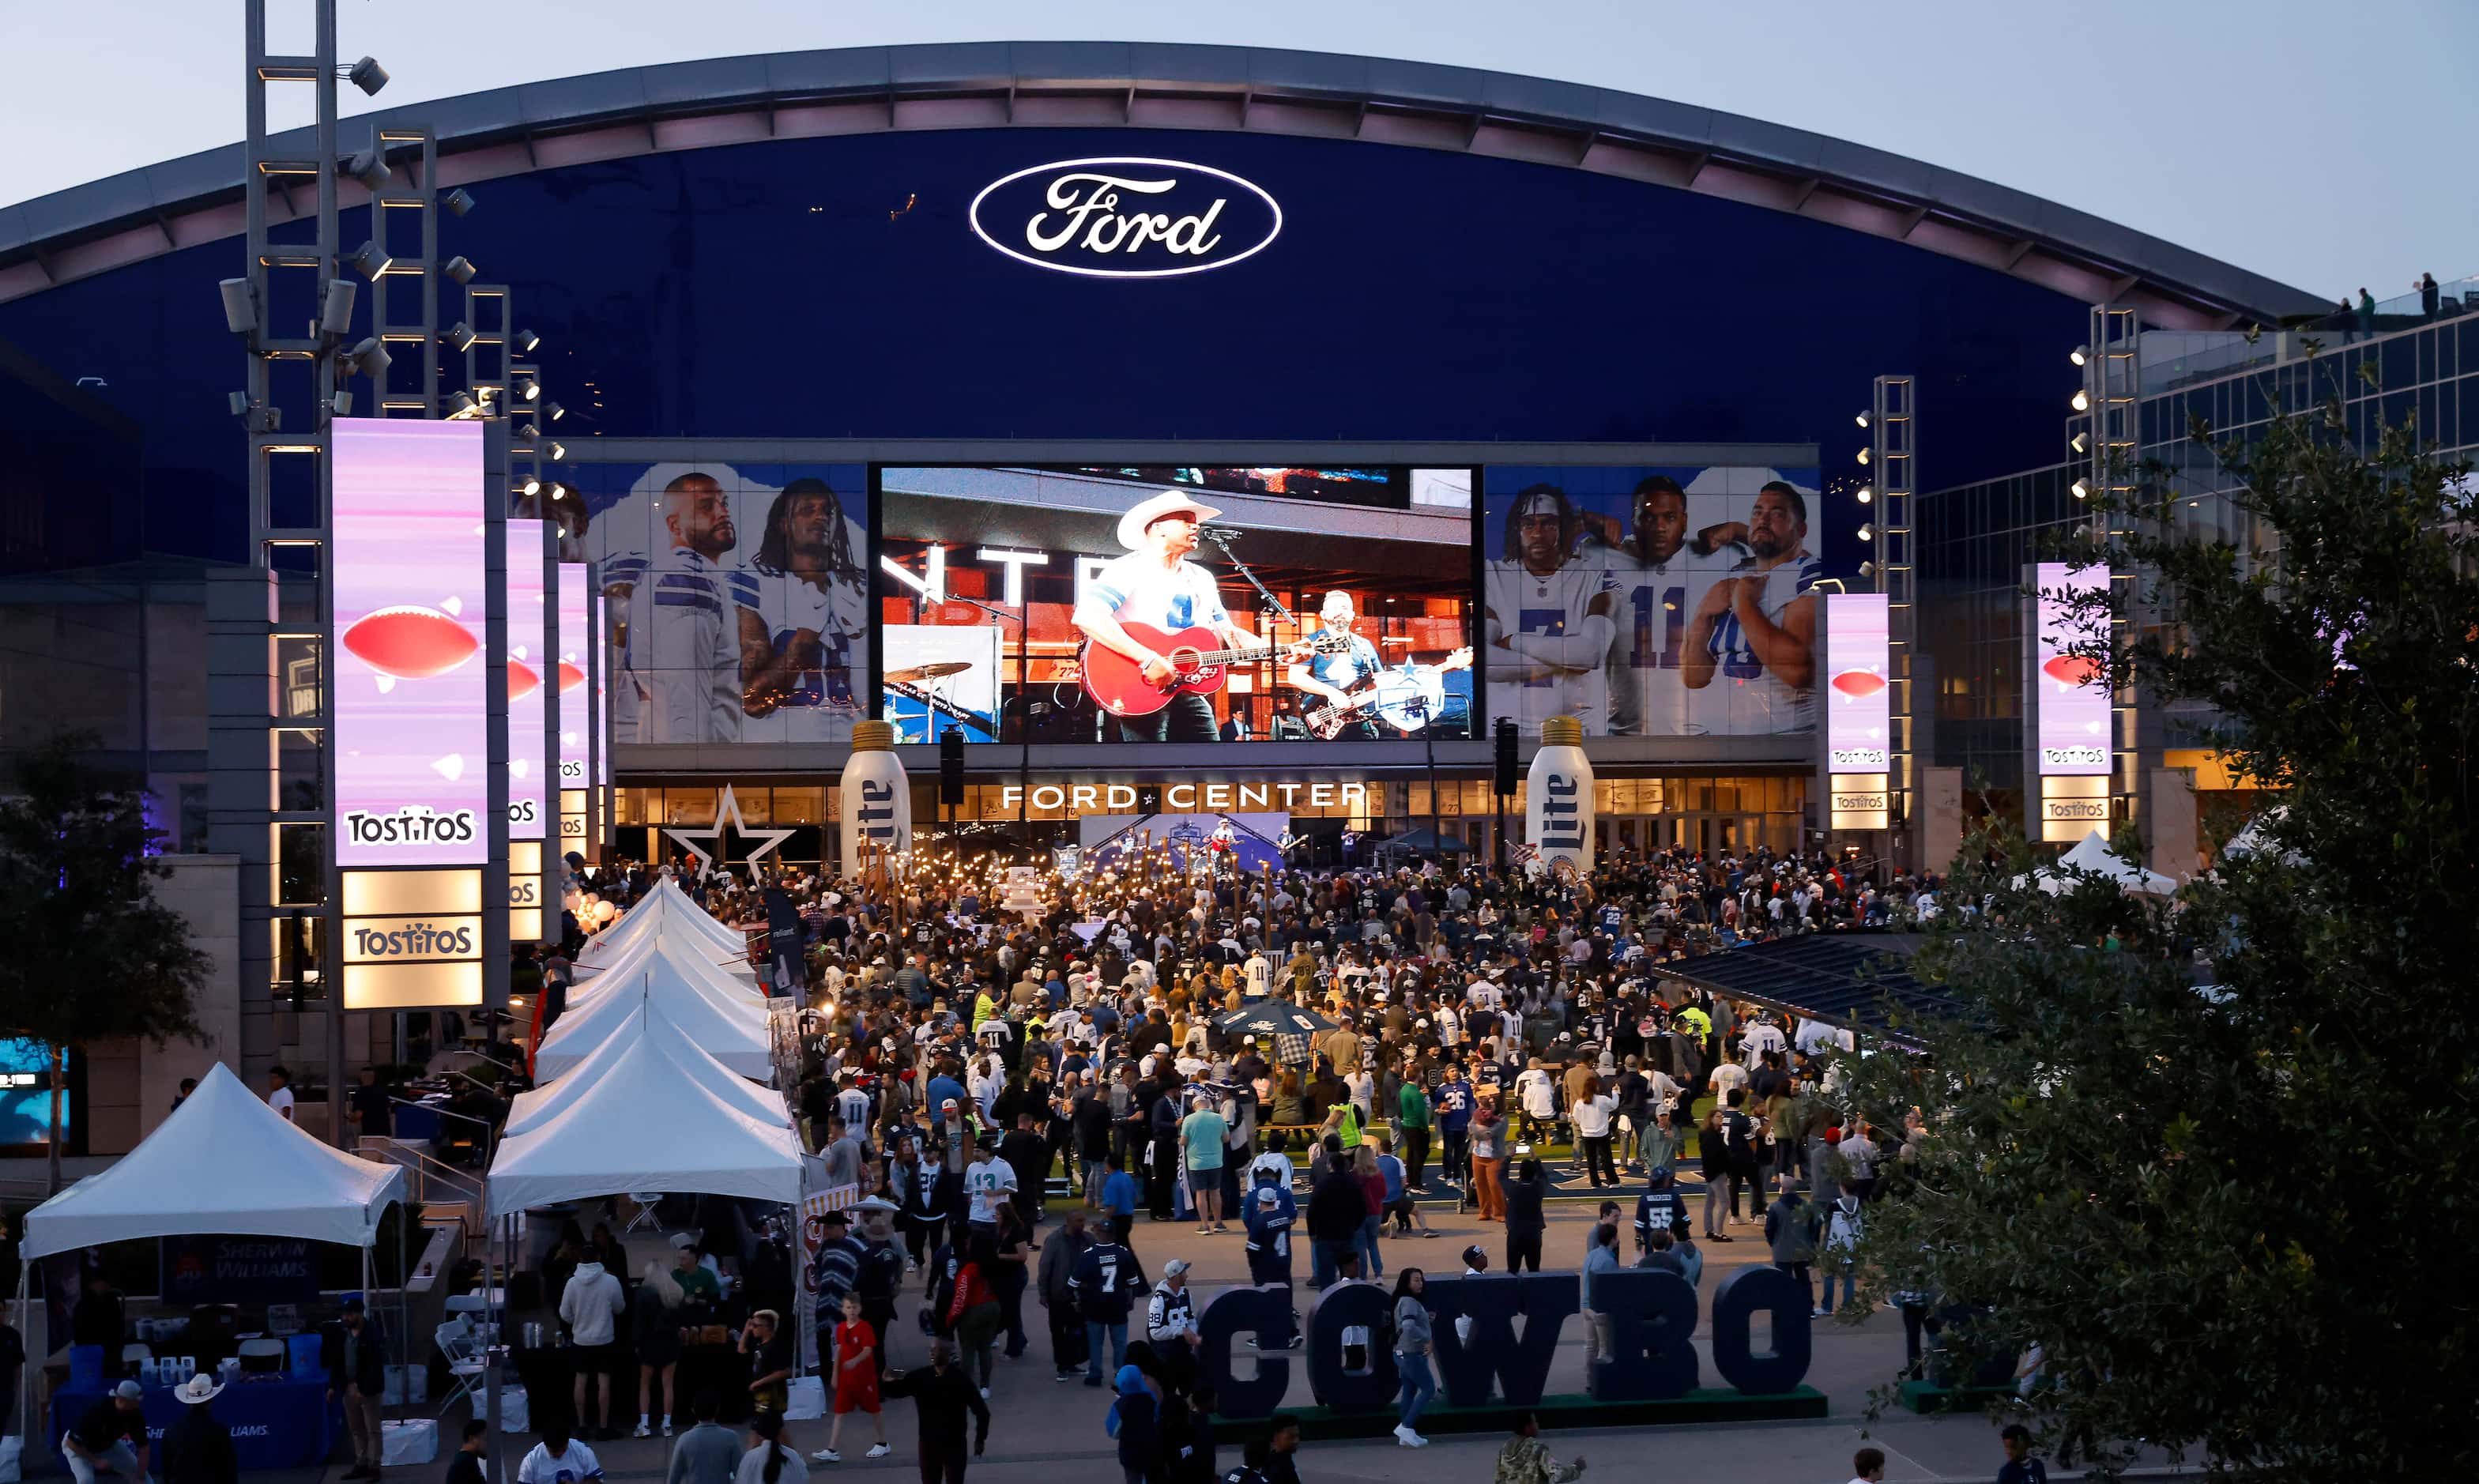 Dallas Cowboys fans gather for a draft party on the Ford Center plaza at The Star in Frisco,...